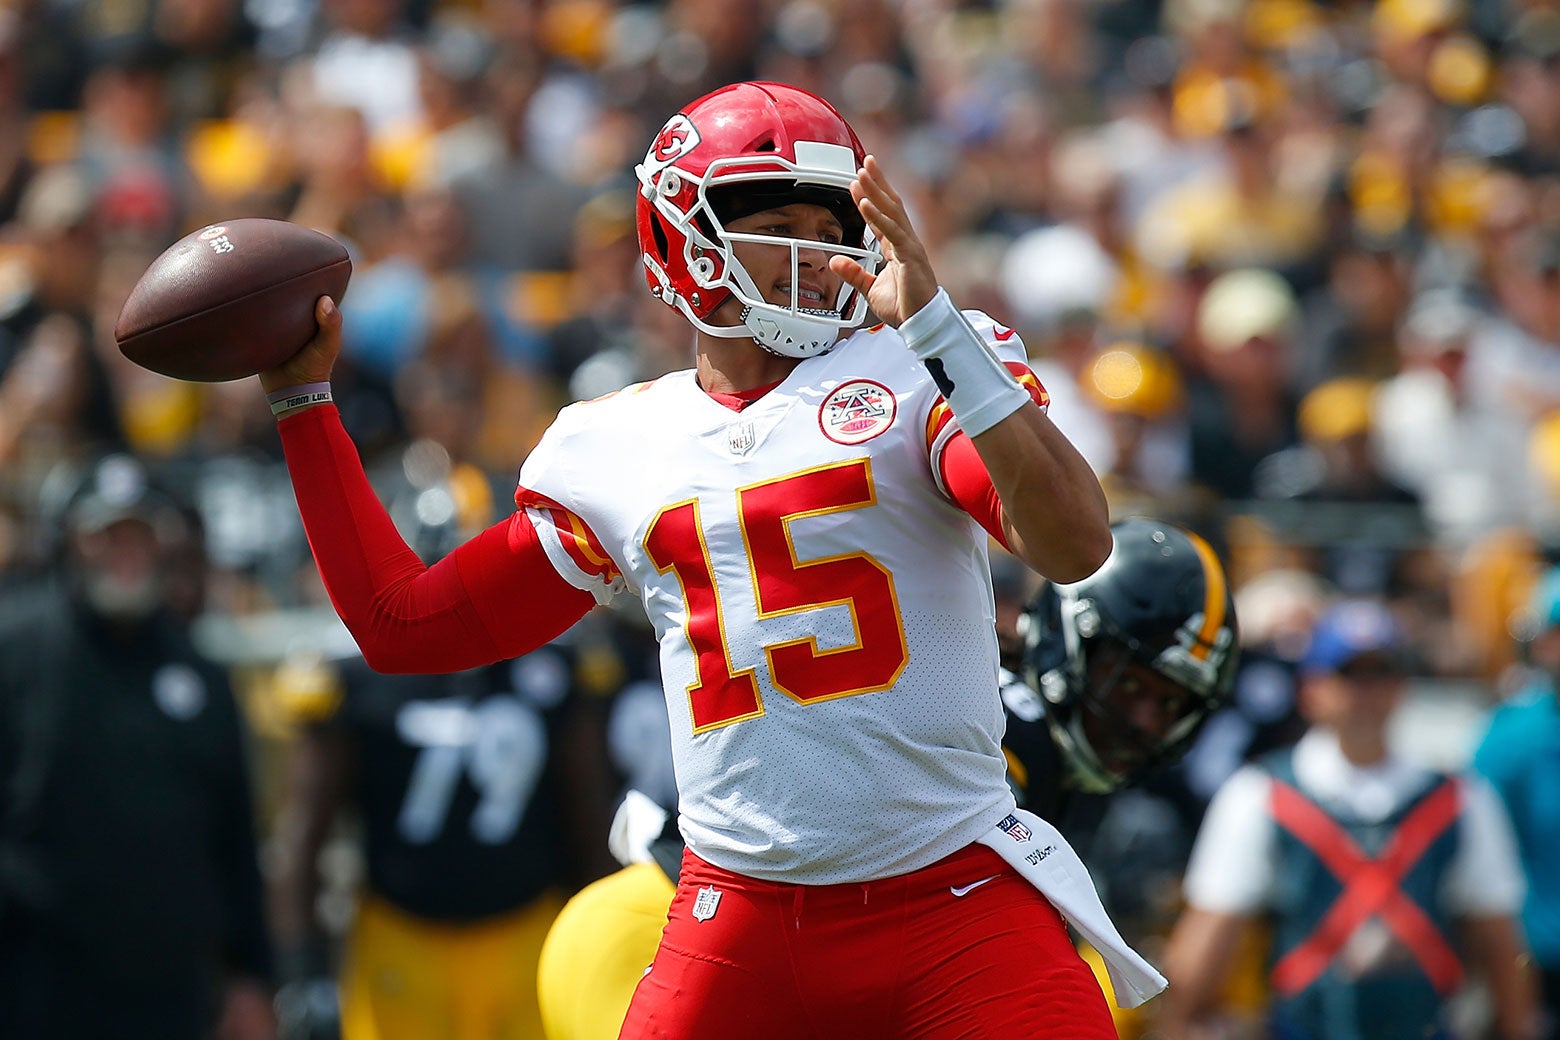 Kansas City Chiefs QB Patrick Mohomes about to throw a pass.